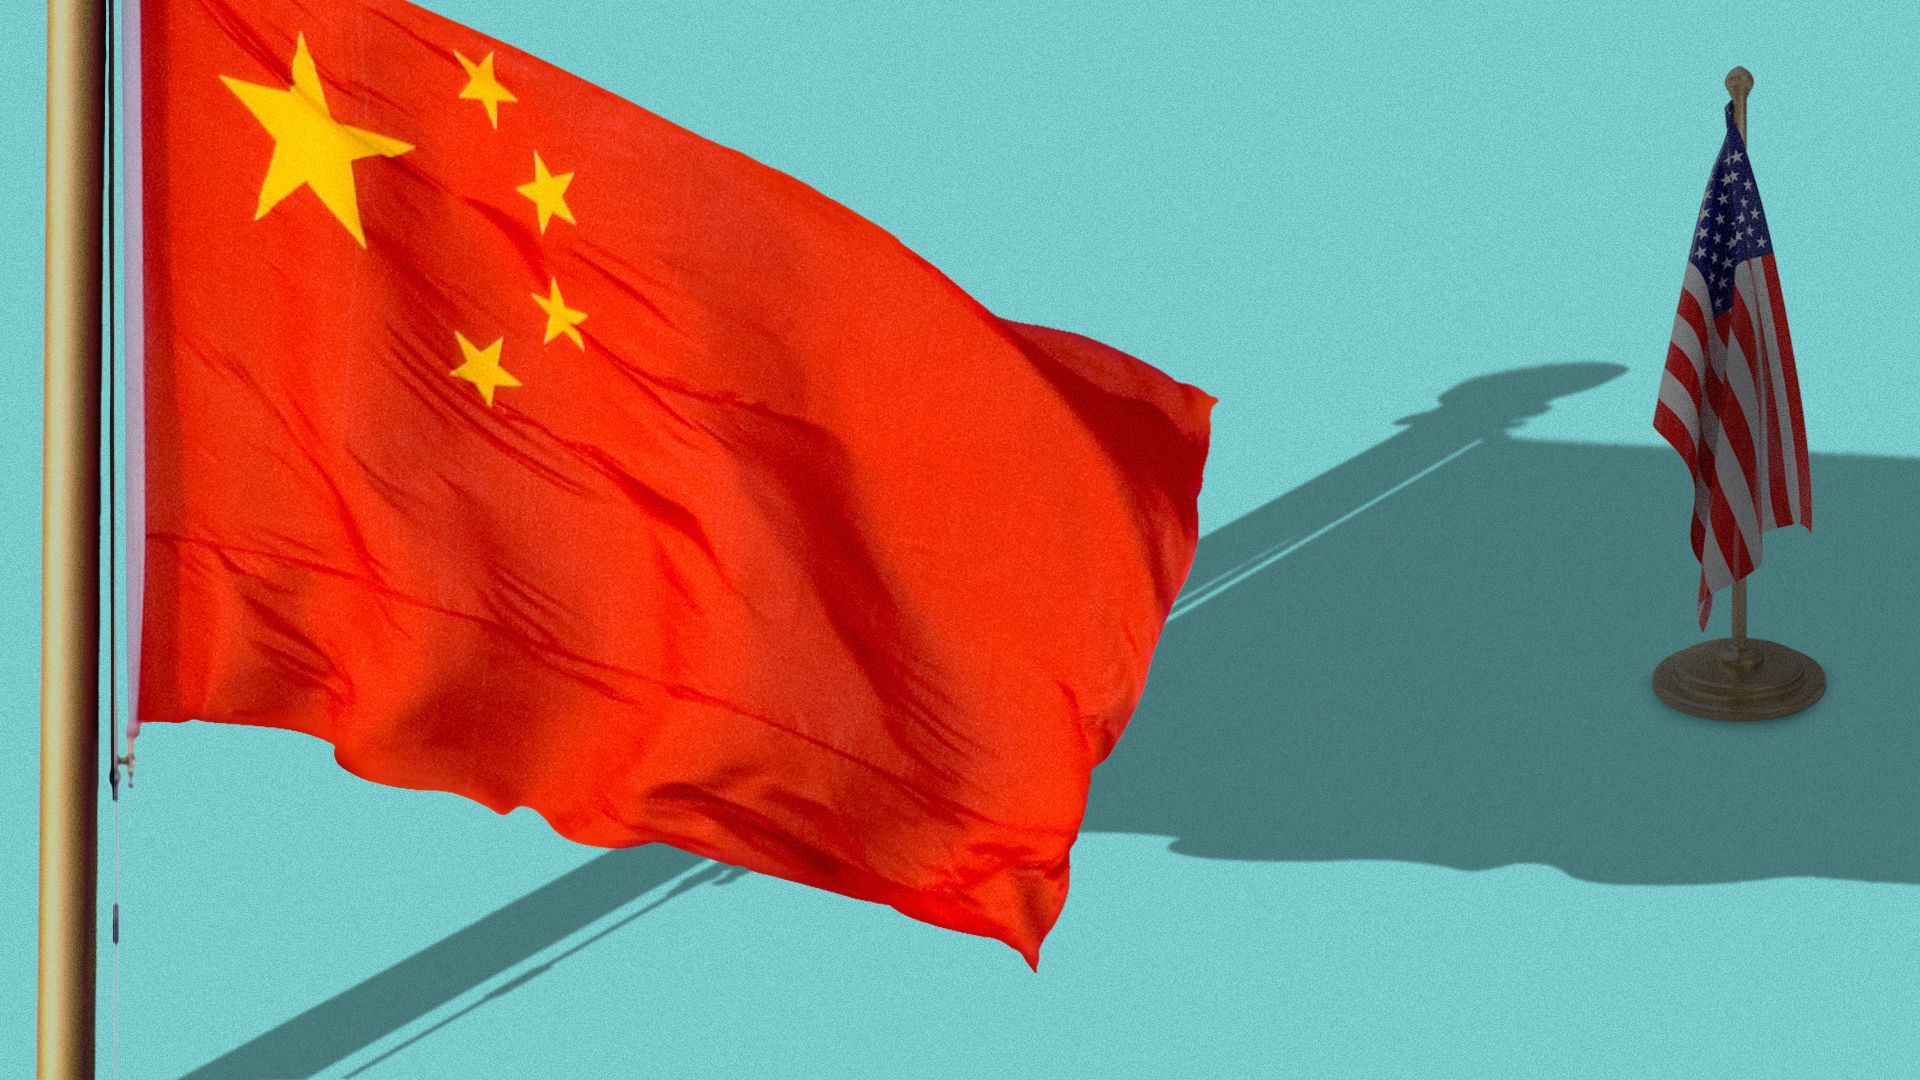  Illustration of China's flag casting a shadow over a smaller US flag.